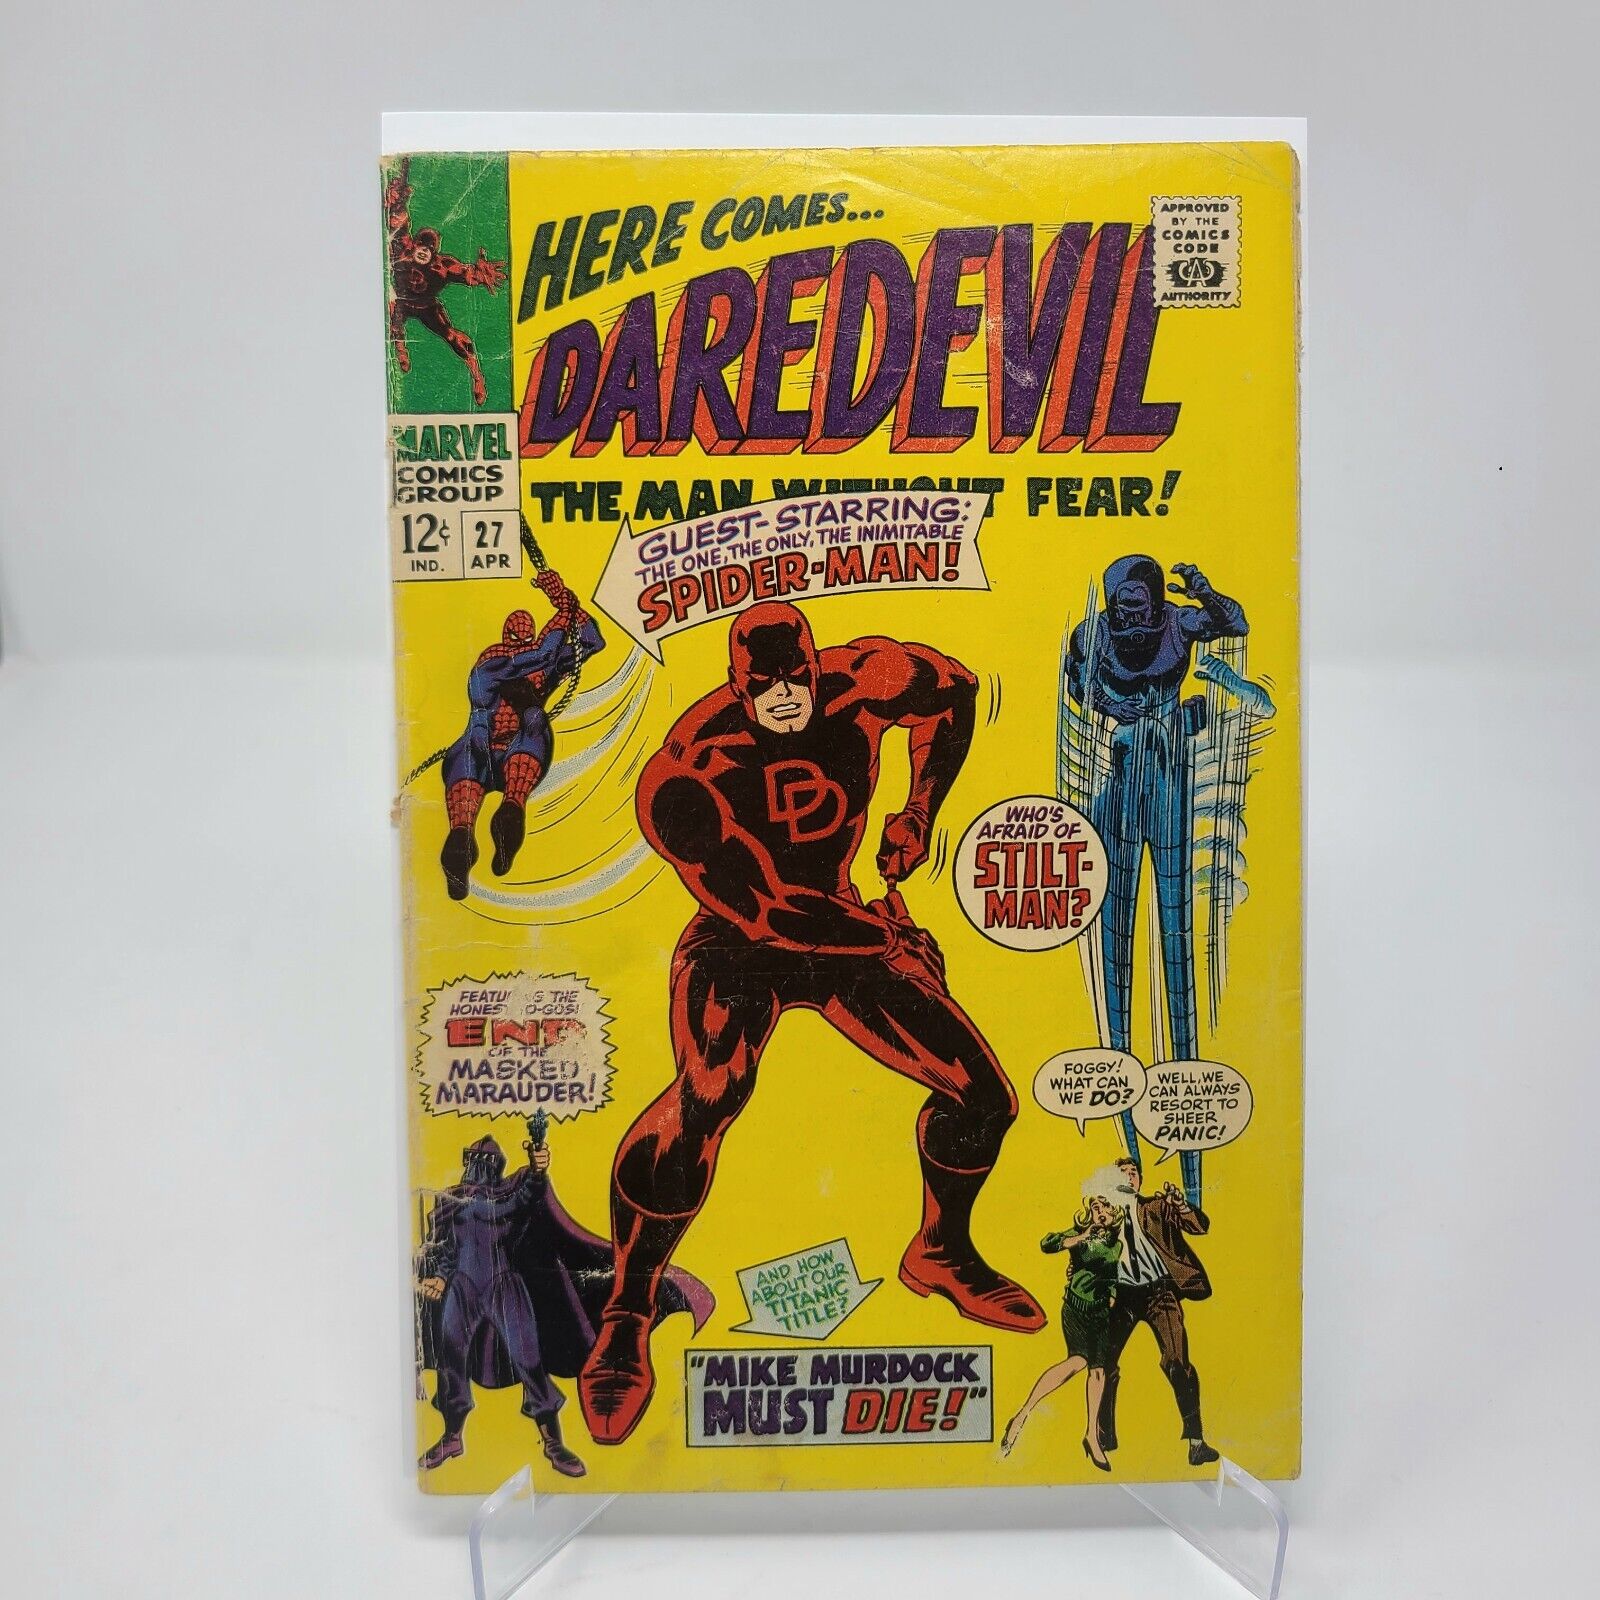 DAREDEVIL #27 (1967) Gene Colan Amazing Spider-Man 《LOW GRADE》COMBINED SHIPPING